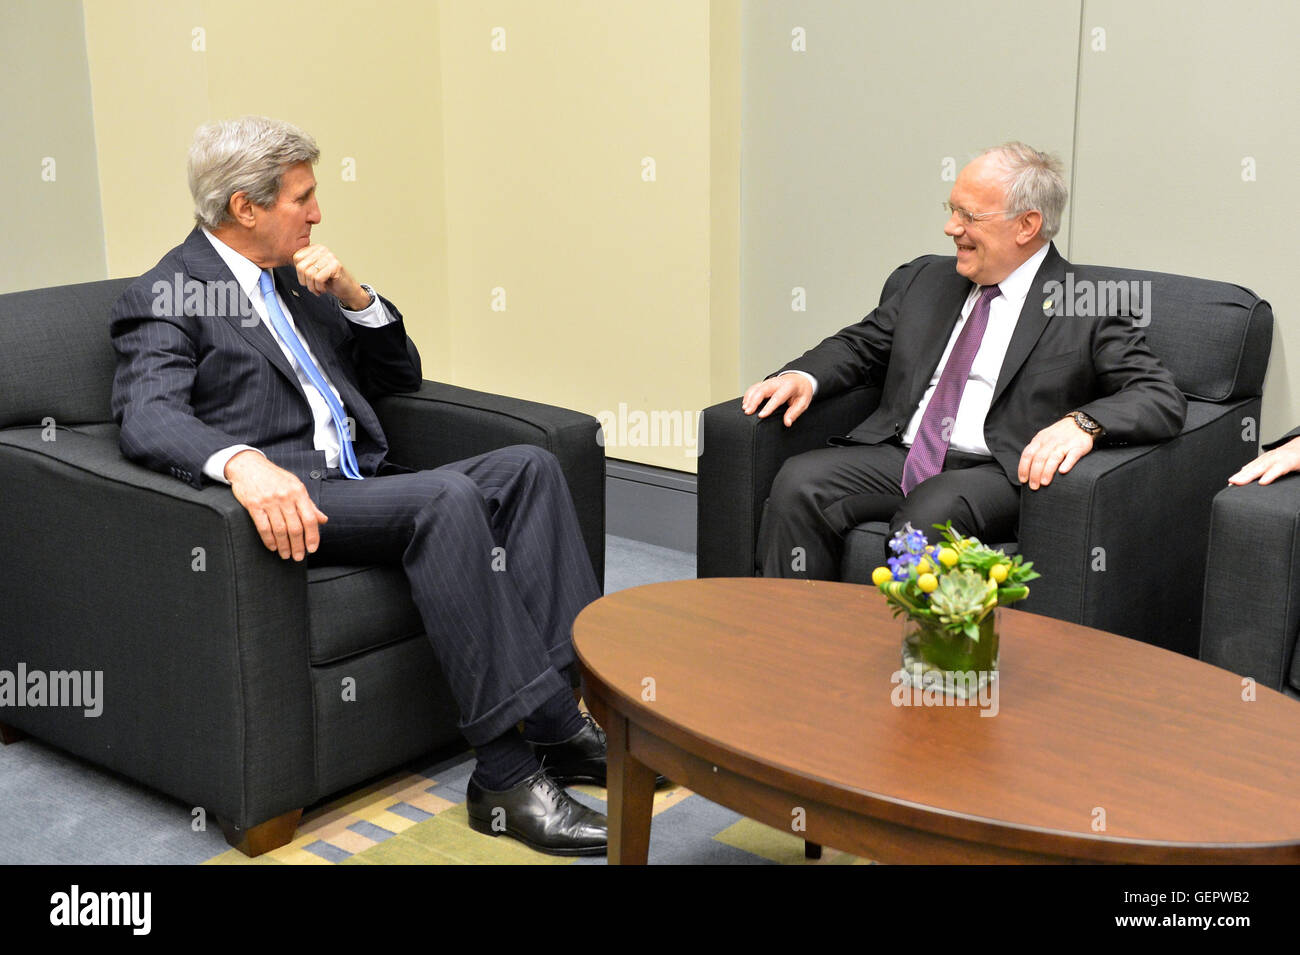 Secretary Kerry Meets With Swiss President Schneider-Ammann at the 2016 Nuclear Security Summit in Washington Stock Photo